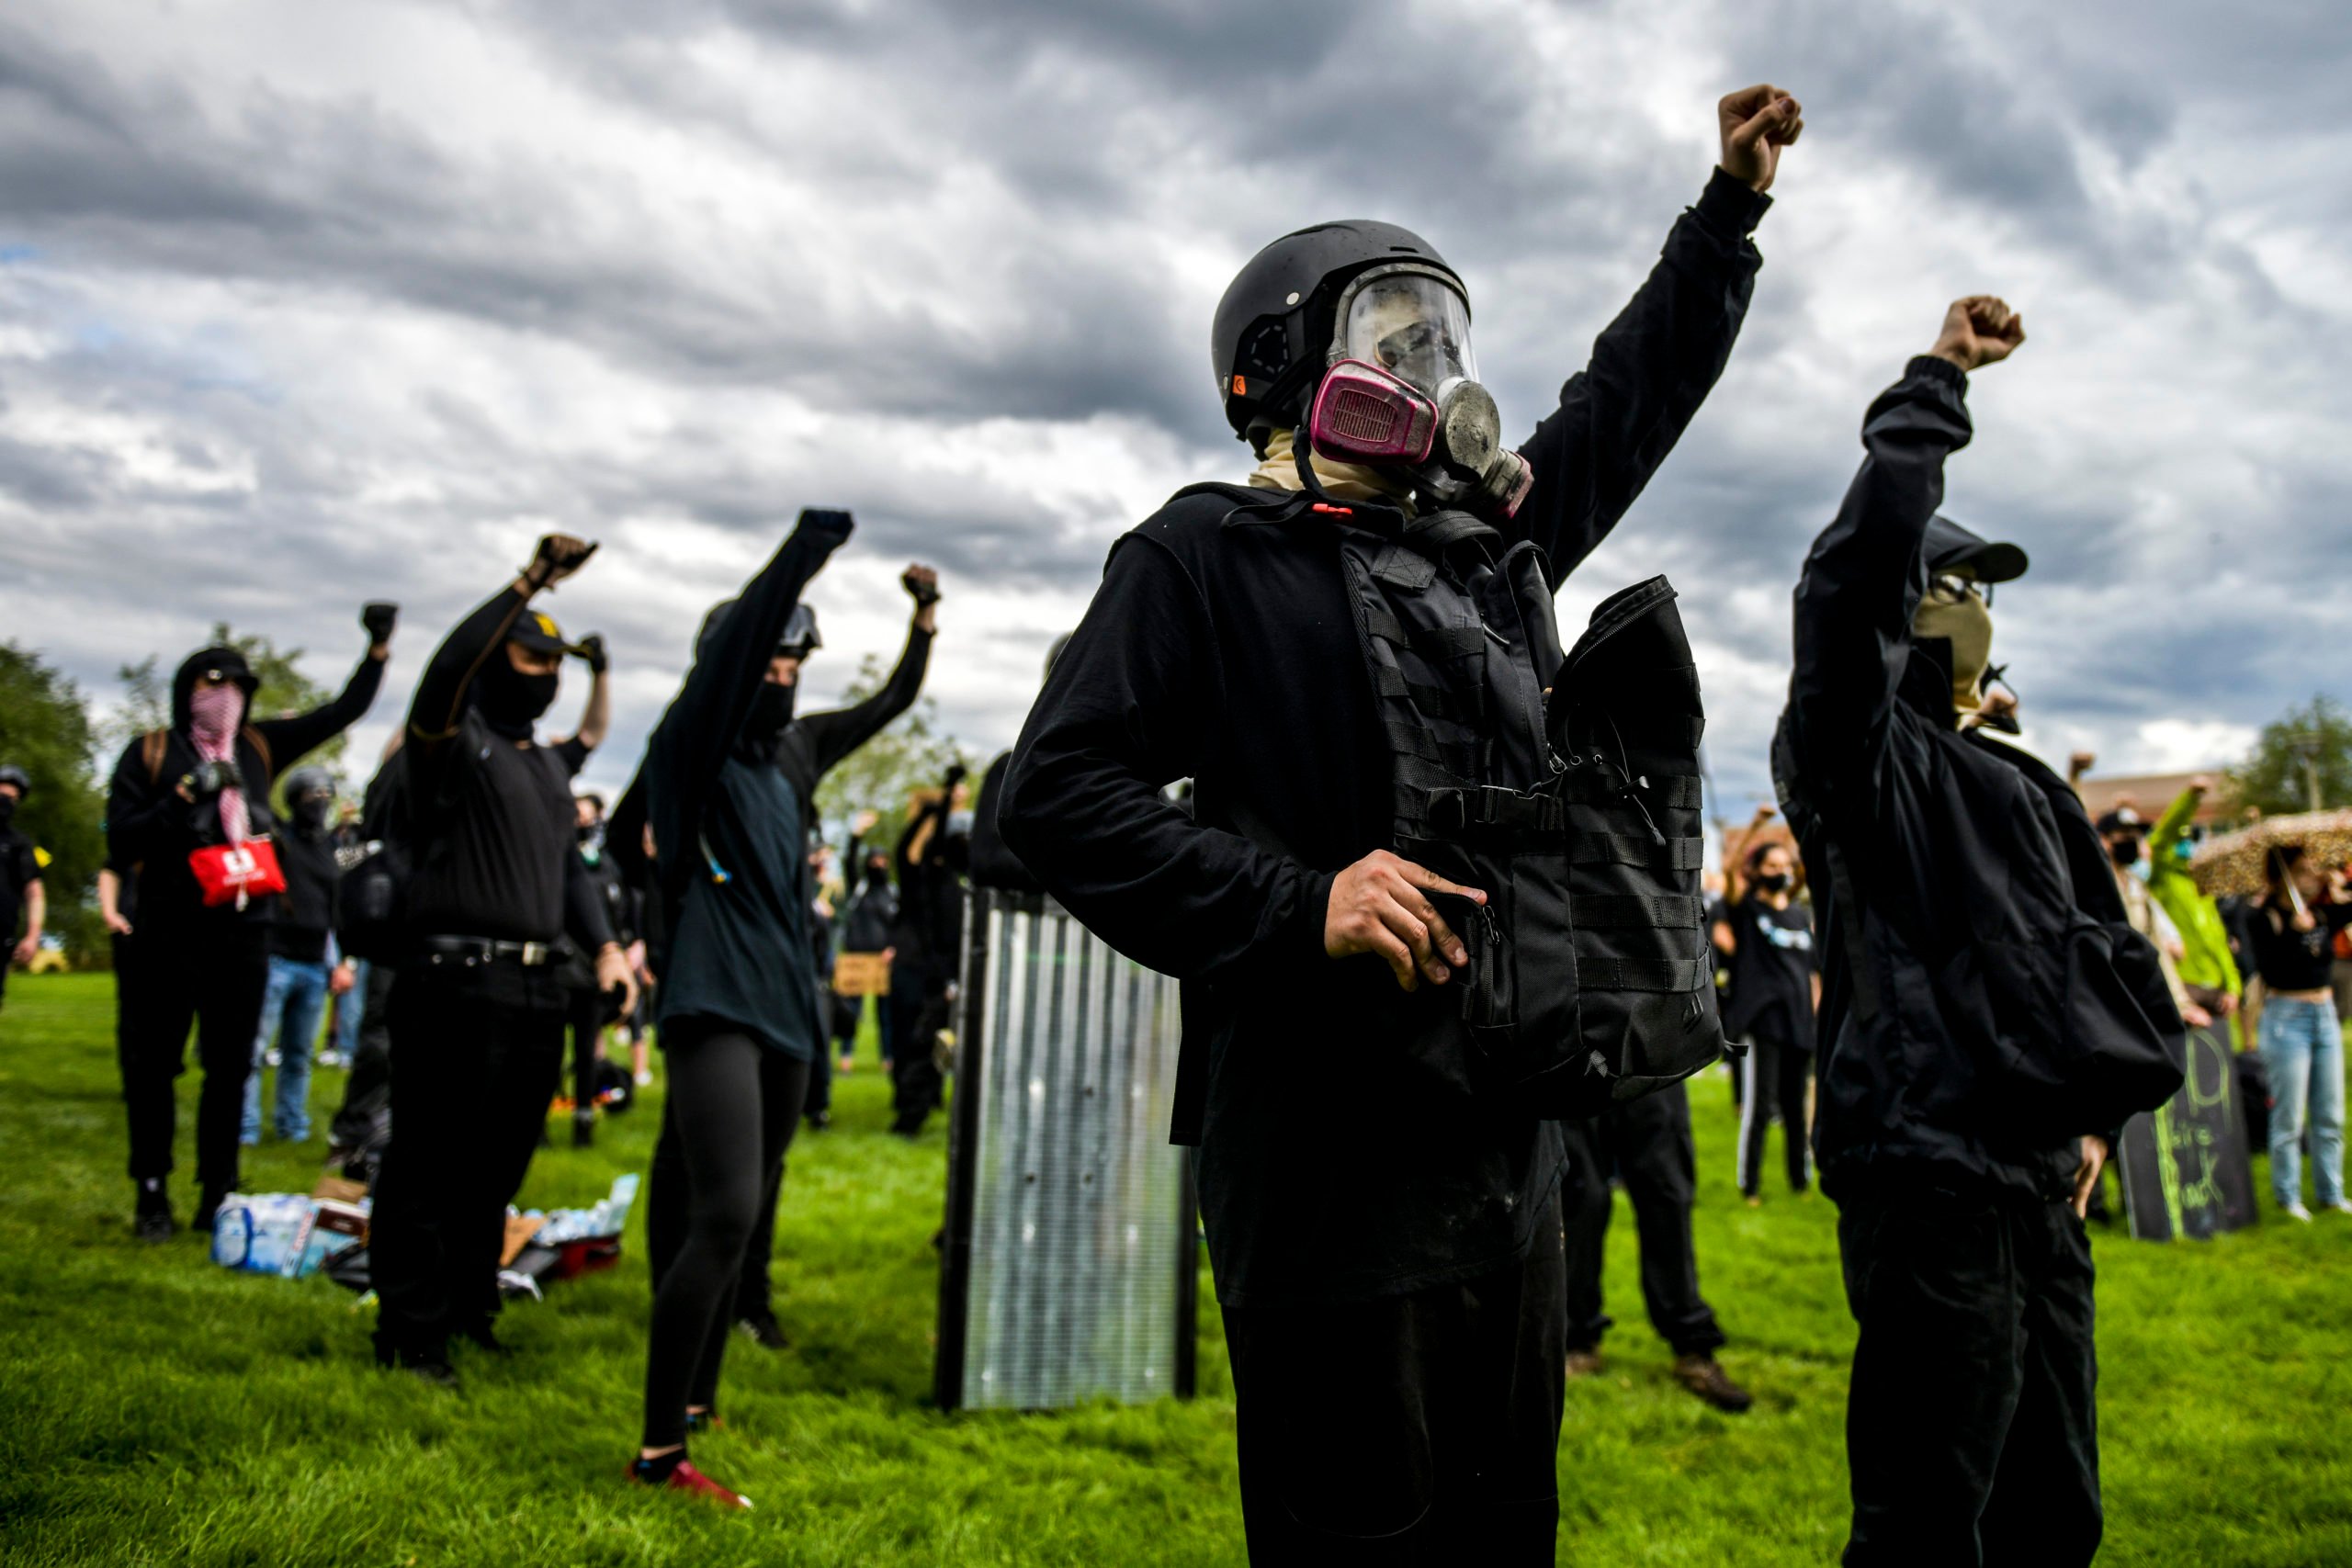 AURORA, CO - JULY 25: People raise their fists in the air as they protest the death of Elijah McClain outside the Aurora Police Department Headquarters on July 25, 2020 in Aurora, Colorado. On August 24, 2019 McClain was walking home when he was forcibly detained by three Aurora police officers and was injected with ketamine after officers requested assistance from the Aurora Fire Rescue. McClain suffered a heart attack on the way to the hospital that night and died six days later. (Michael Ciaglo/Getty Images)